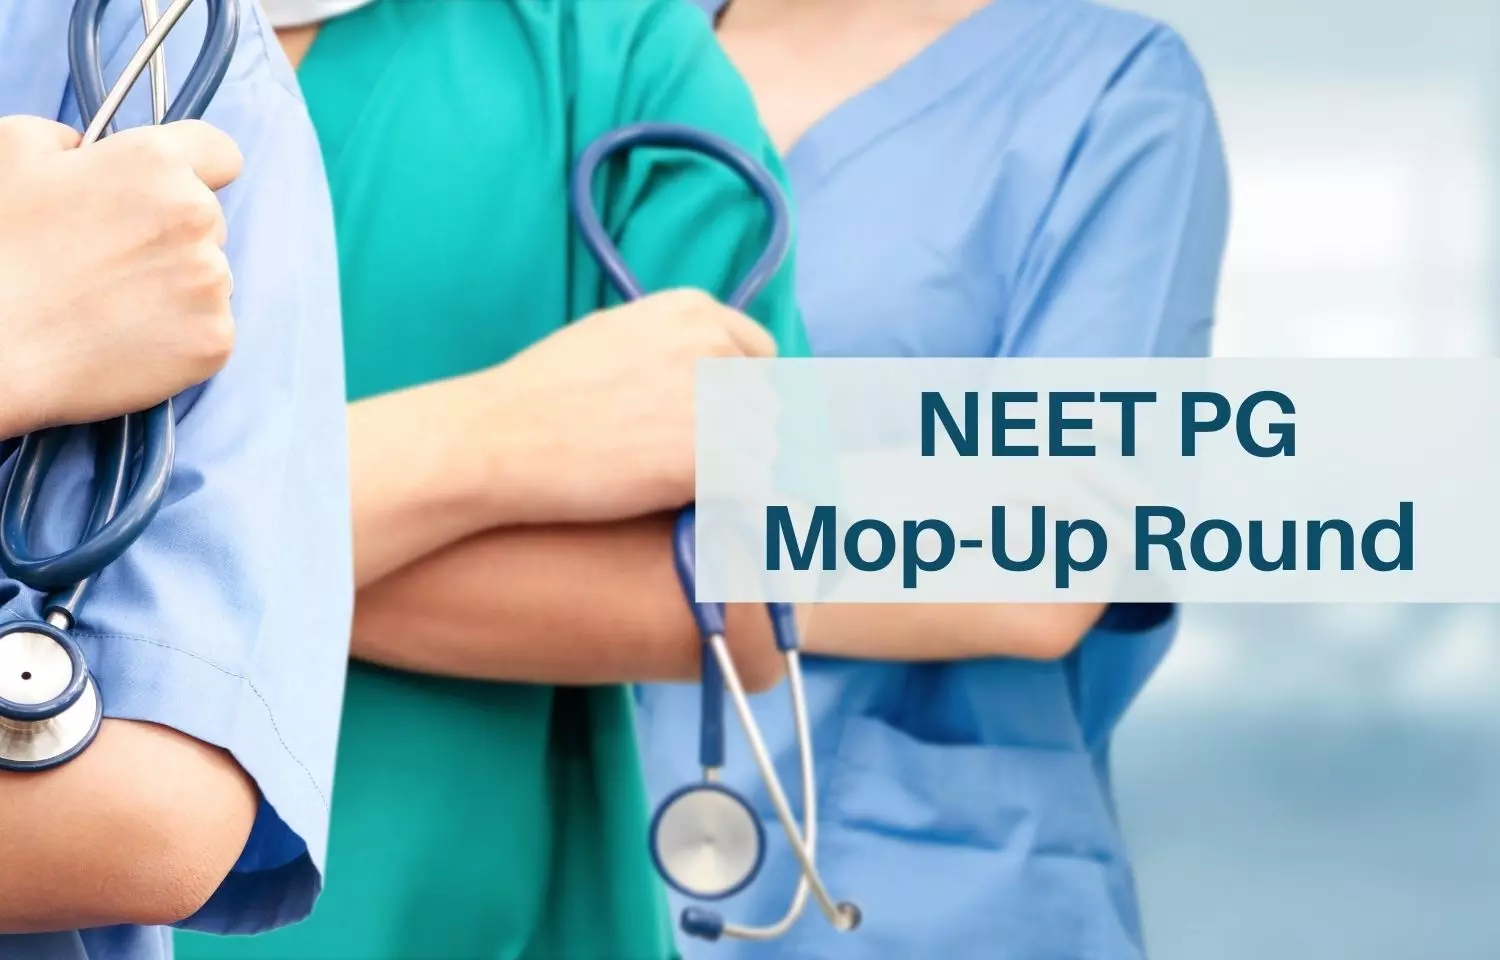 NEET PG Counselling: BFUHS releases revised Schedule of Mop Up round, Check out details